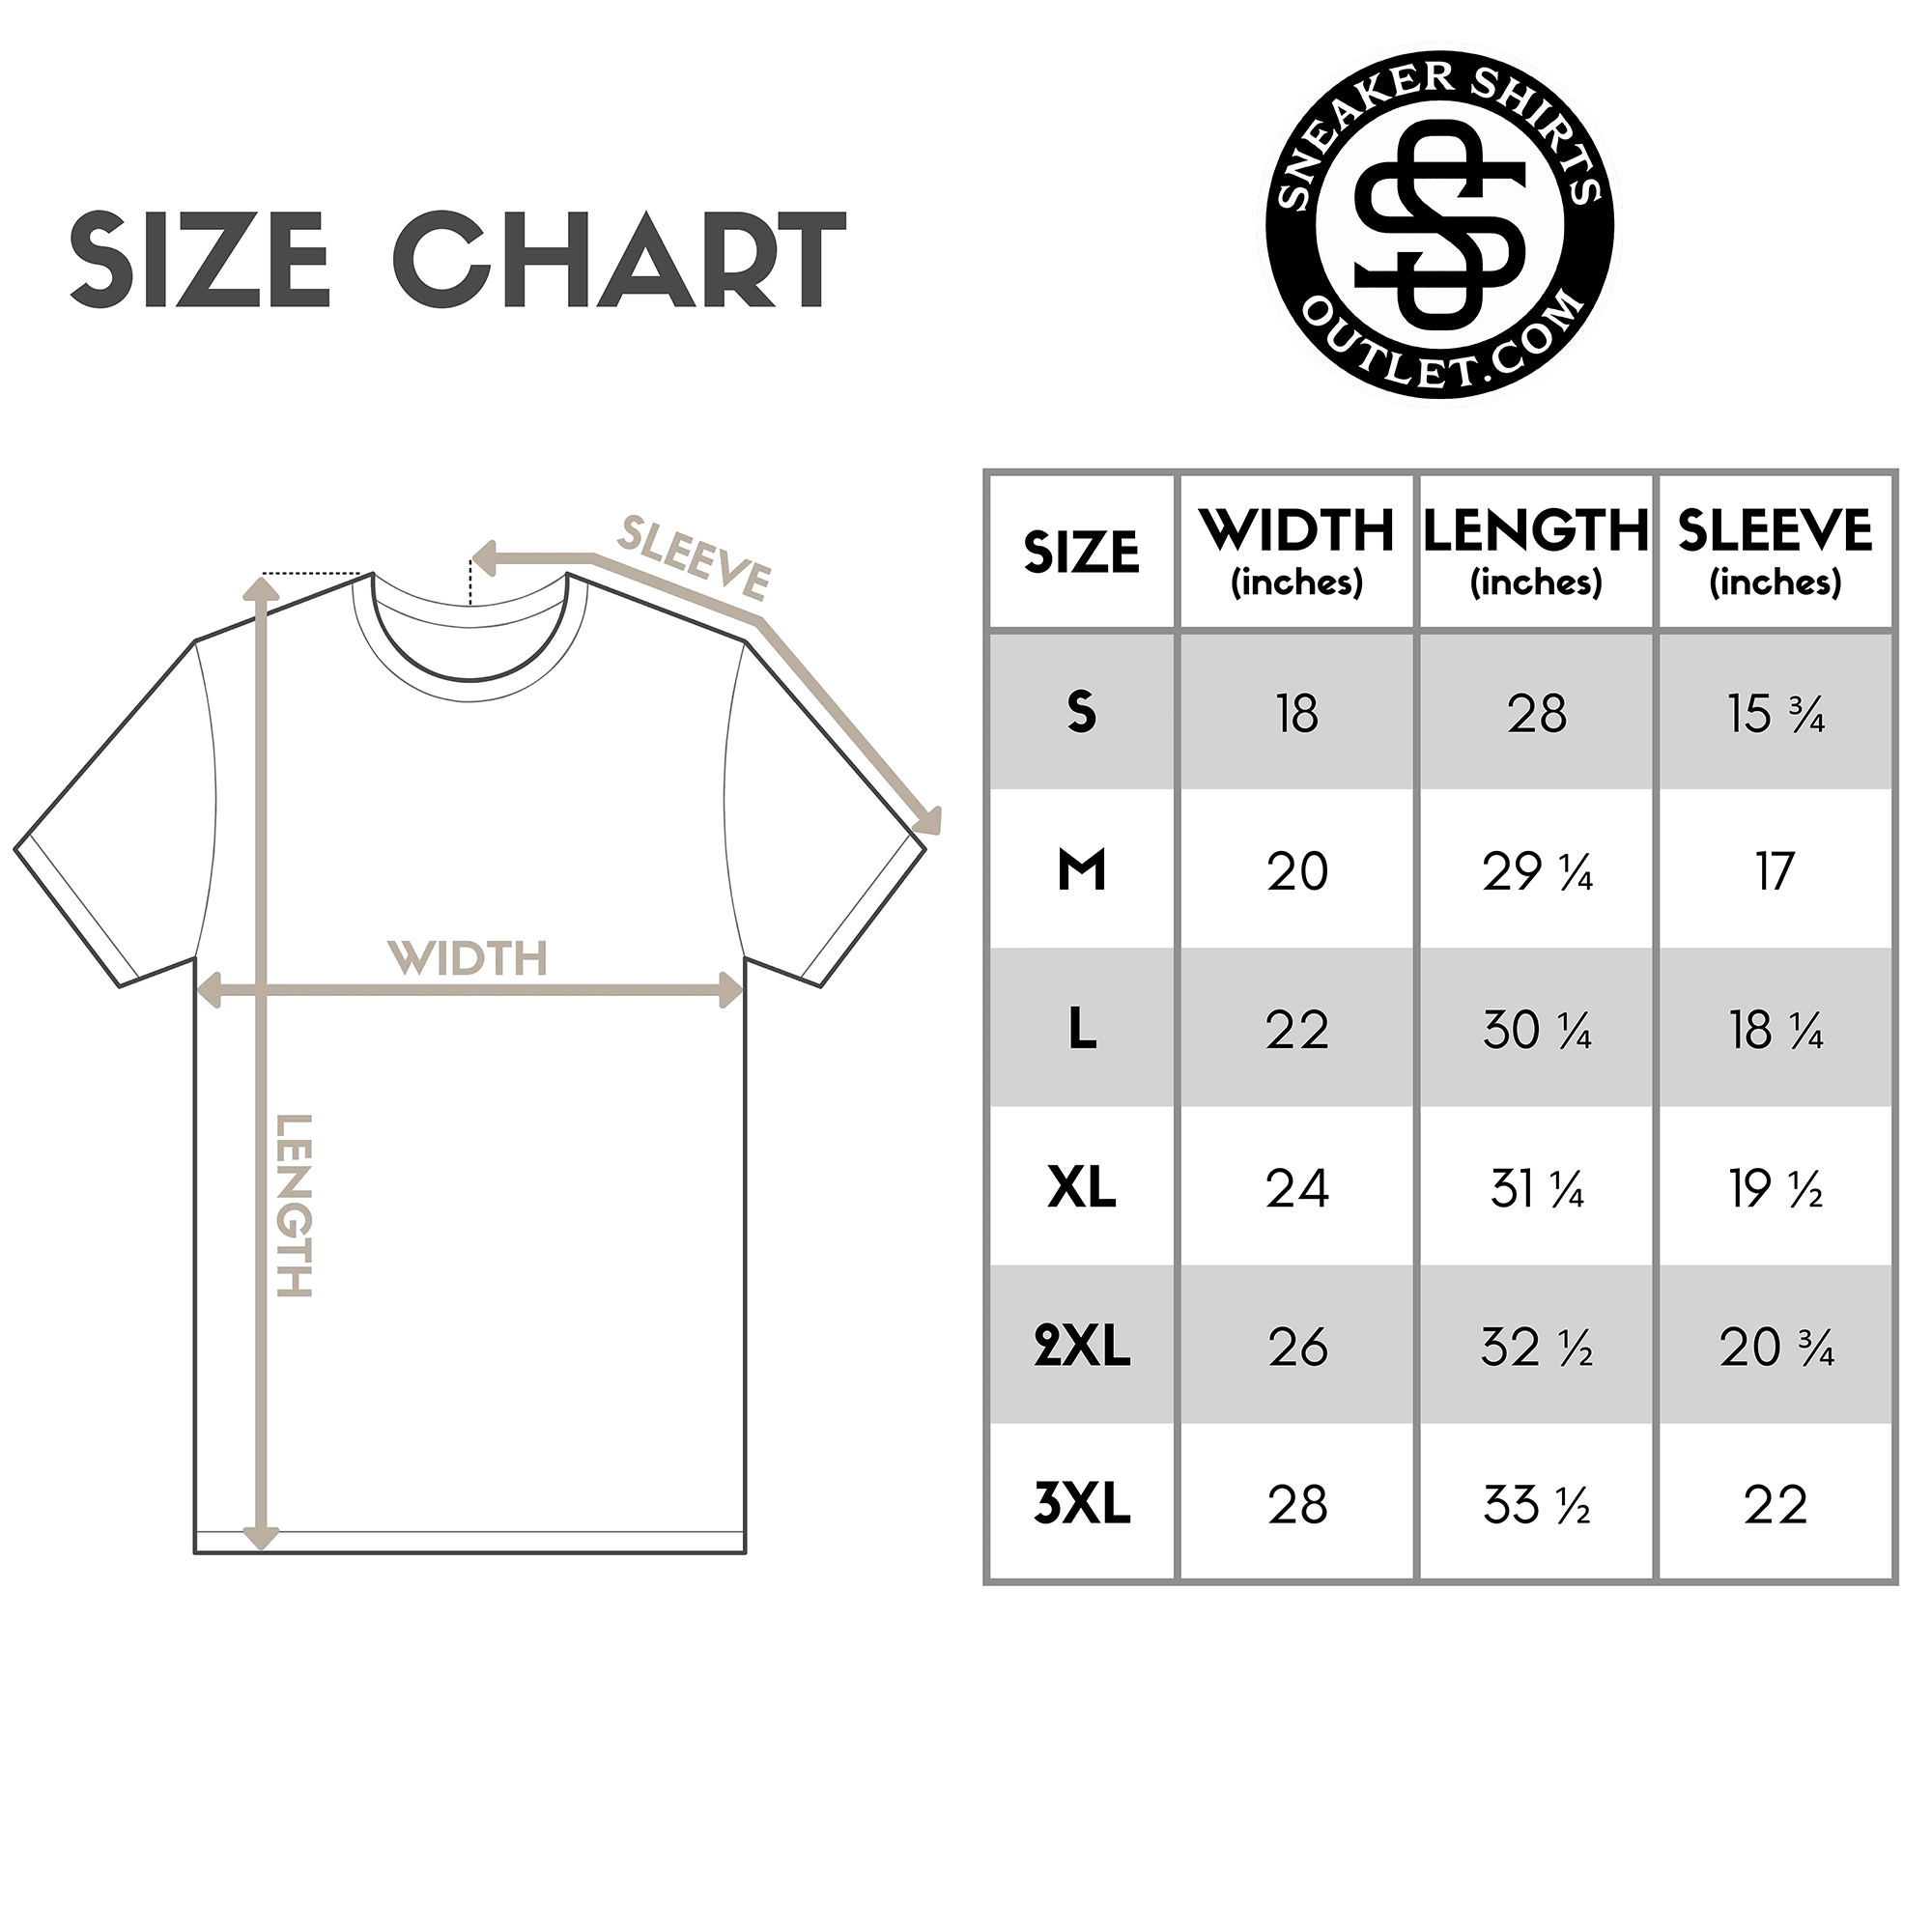 size chart King Chess Shirt Yeezy 500 Enflame photo